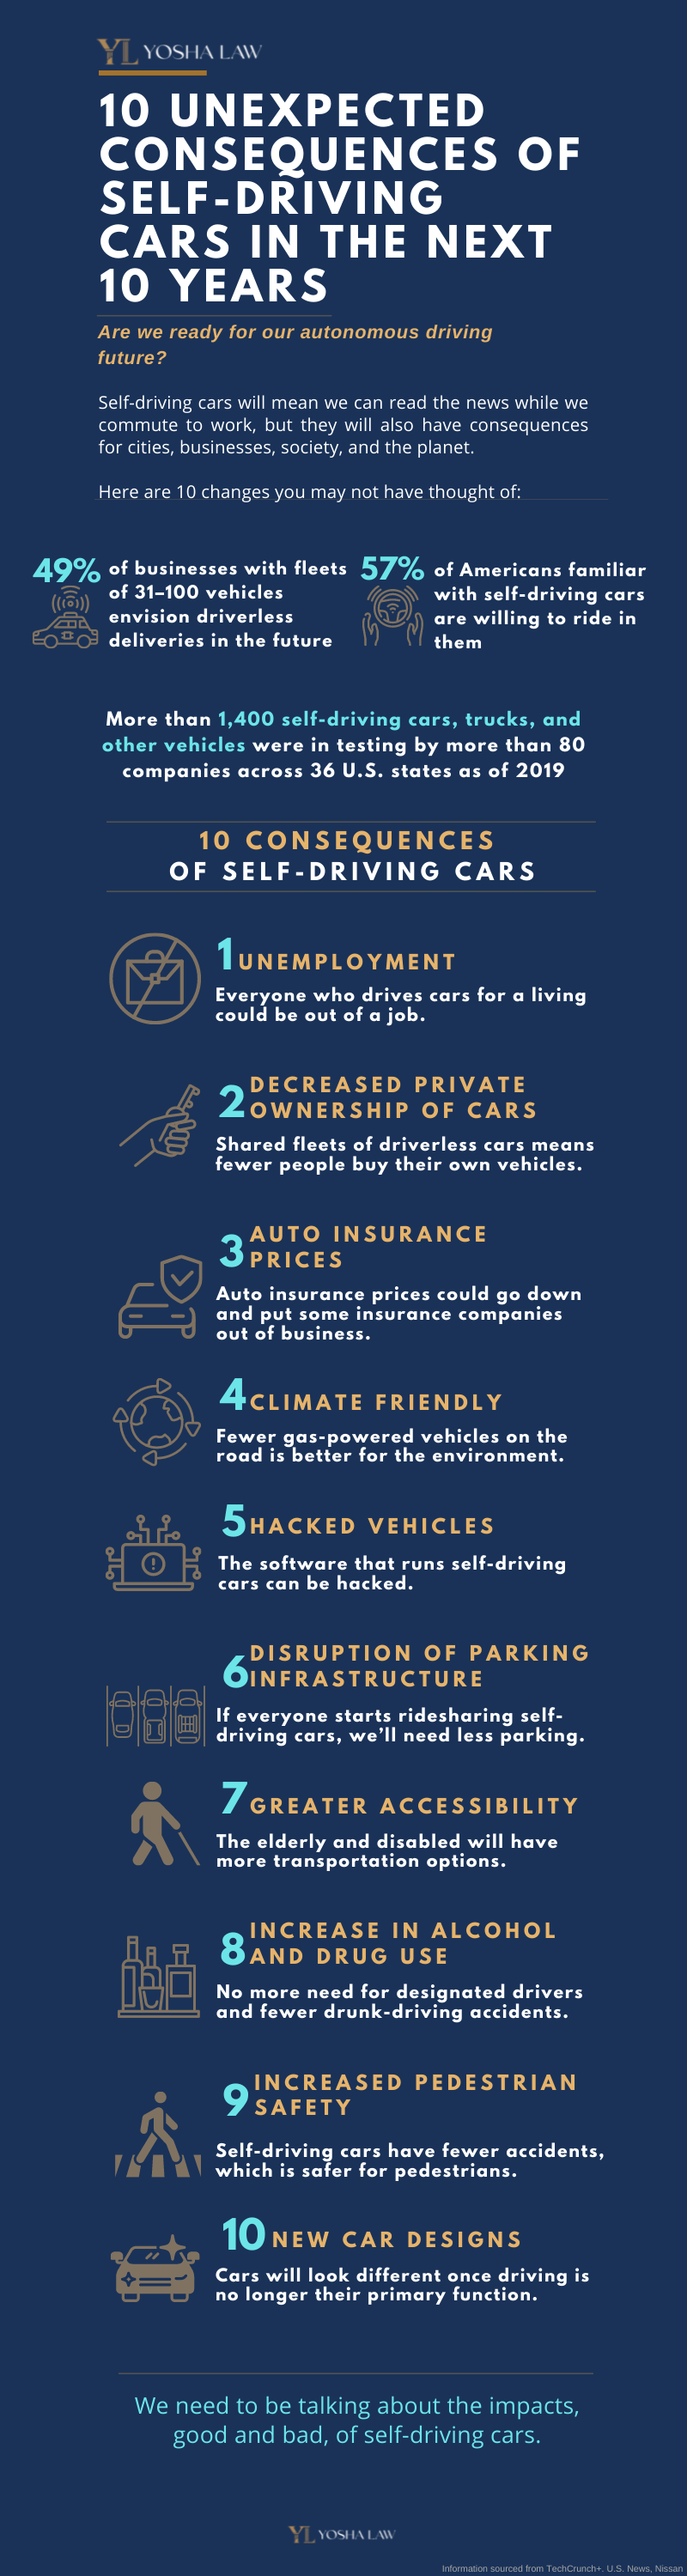 10 Unintended Consequences of Self-Driving Cars in the Next 10 Years